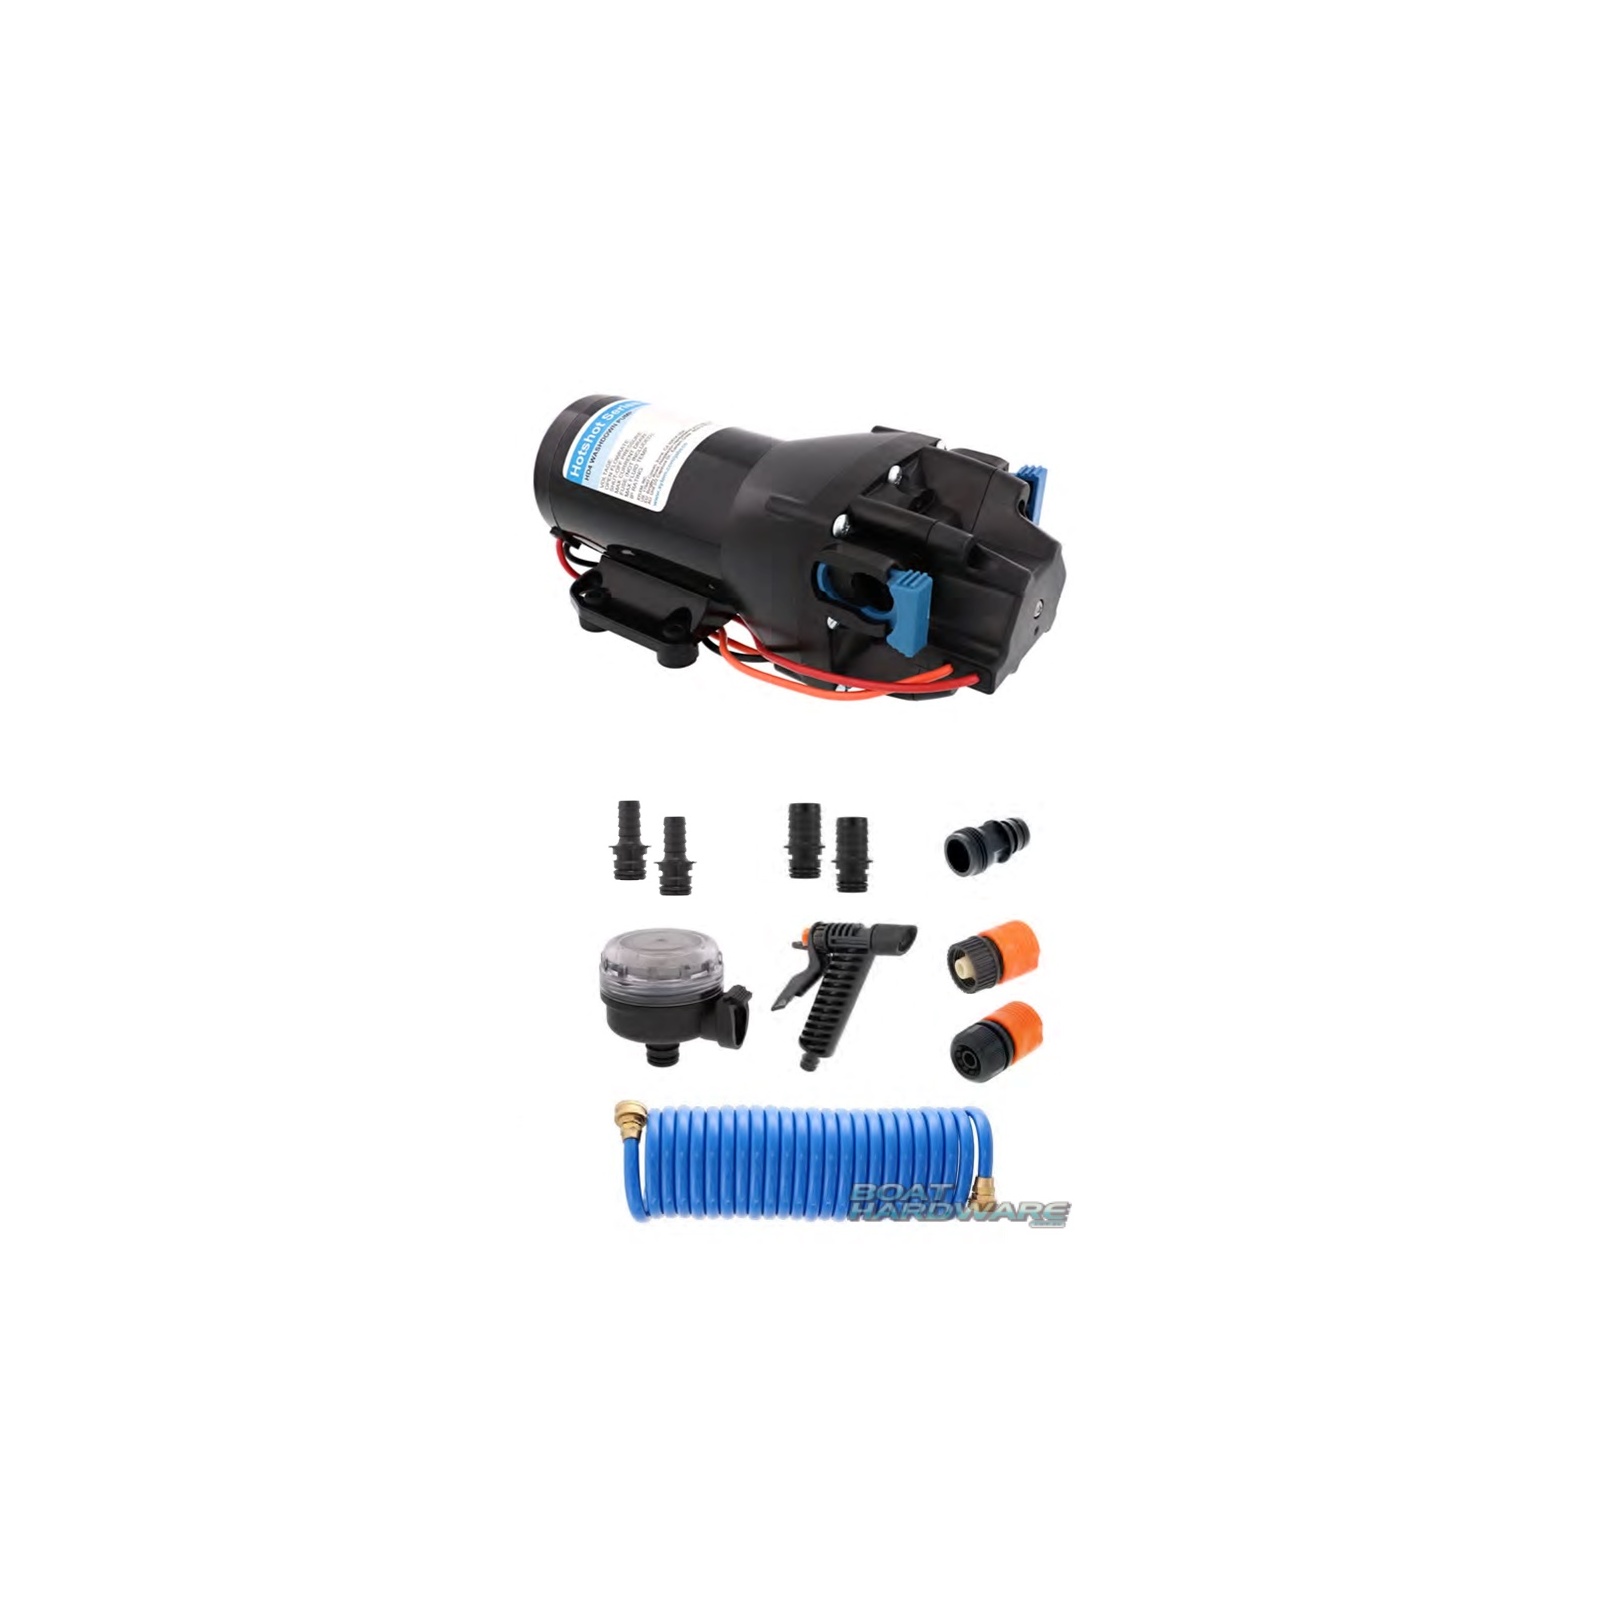 HotShot HD4 12v Washdown Kit with Coiled Hose